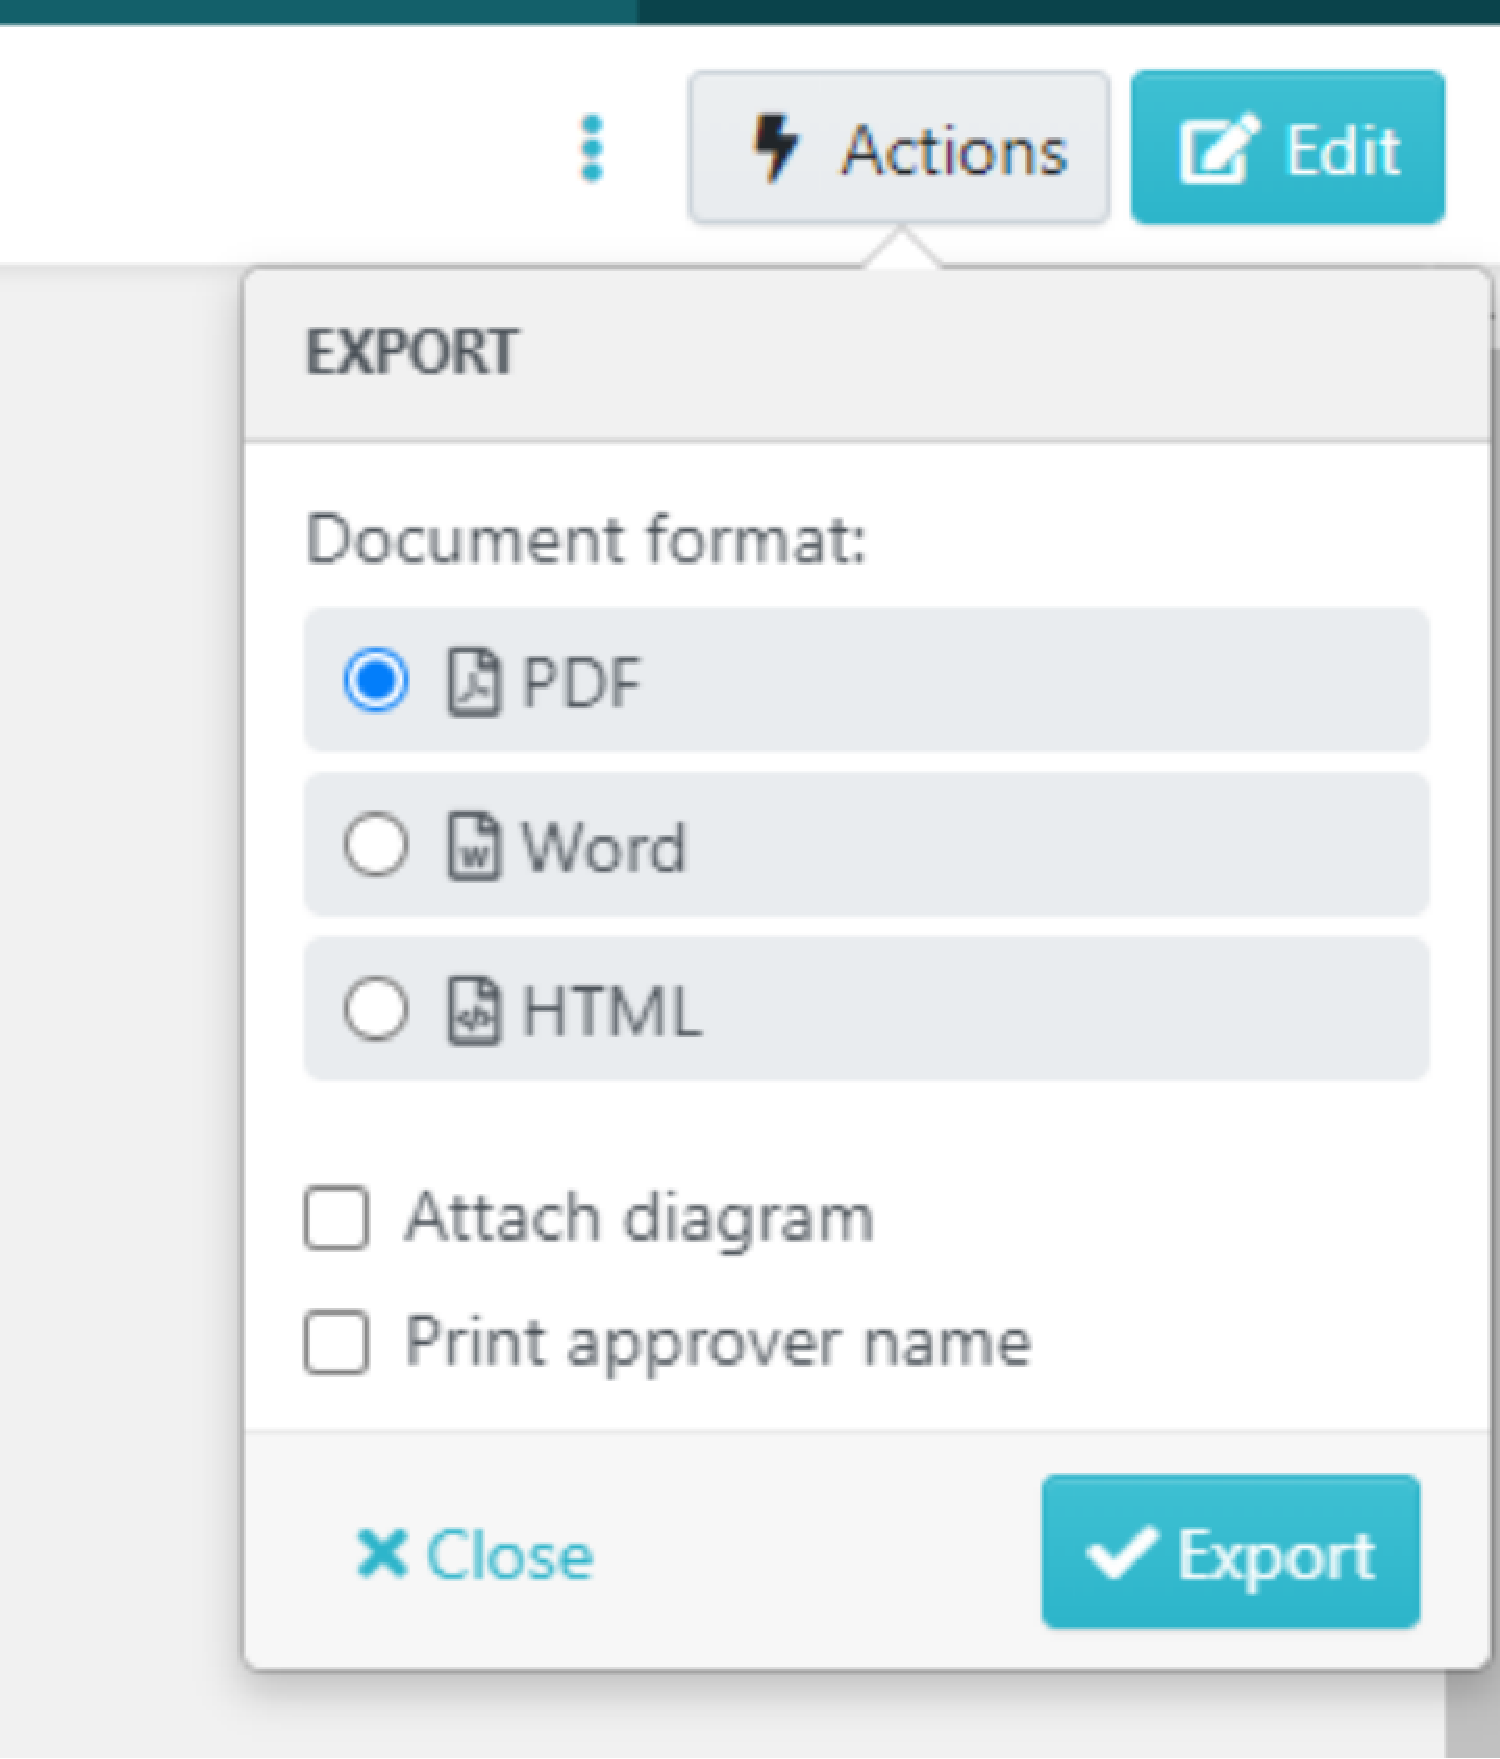 Actions button to click on the Export option